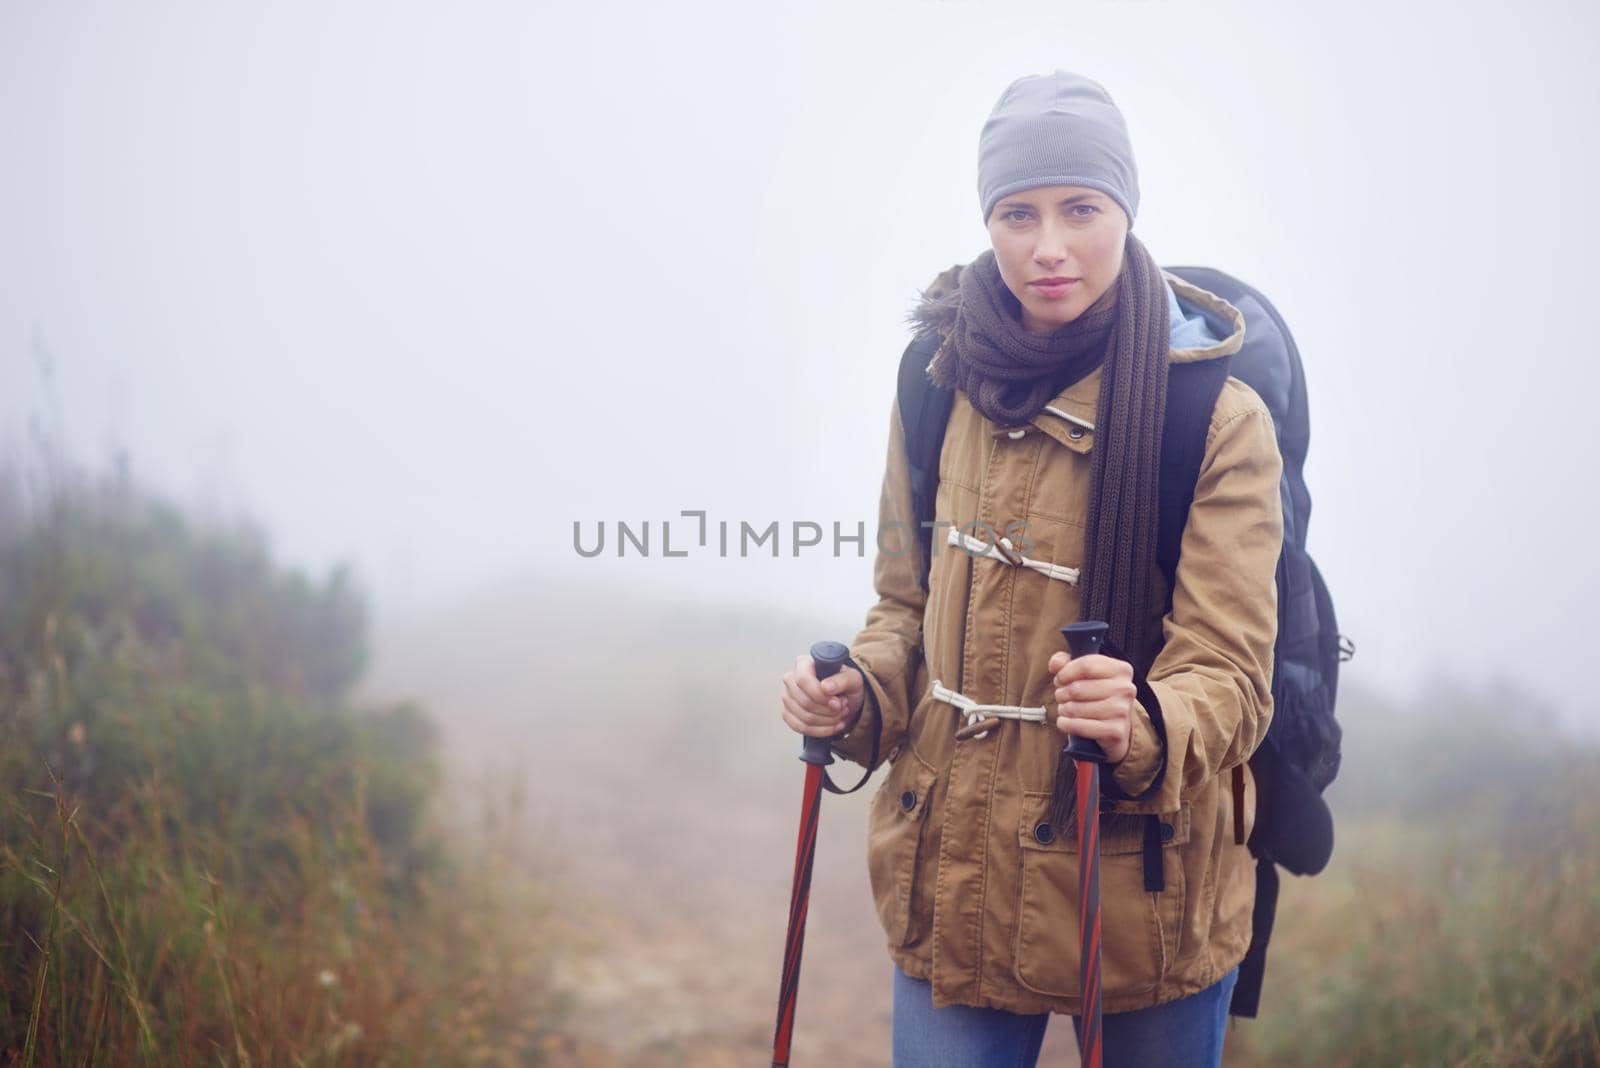 Serious about hiking. Portrait of a young woman hiking along a trail on an overcast day. by YuriArcurs